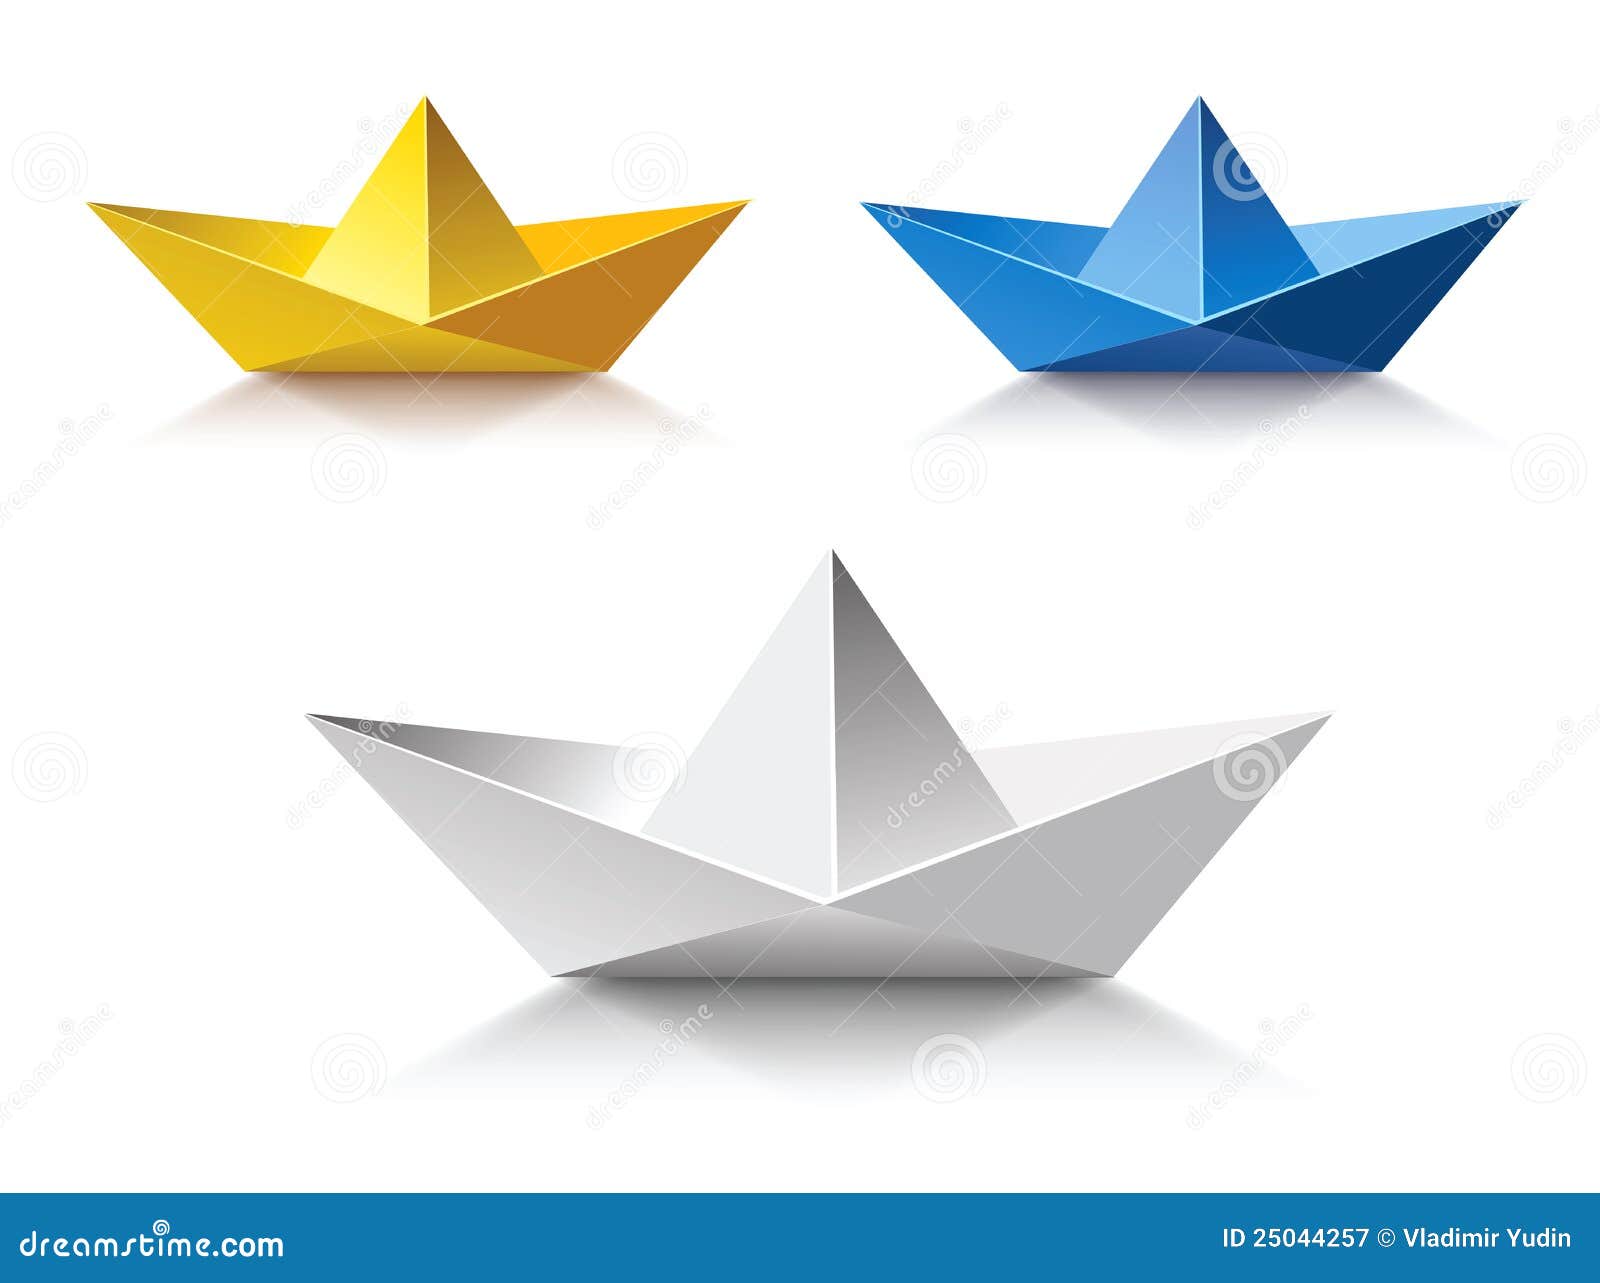 Paper Boats Royalty Free Stock Photography - Image: 25044257